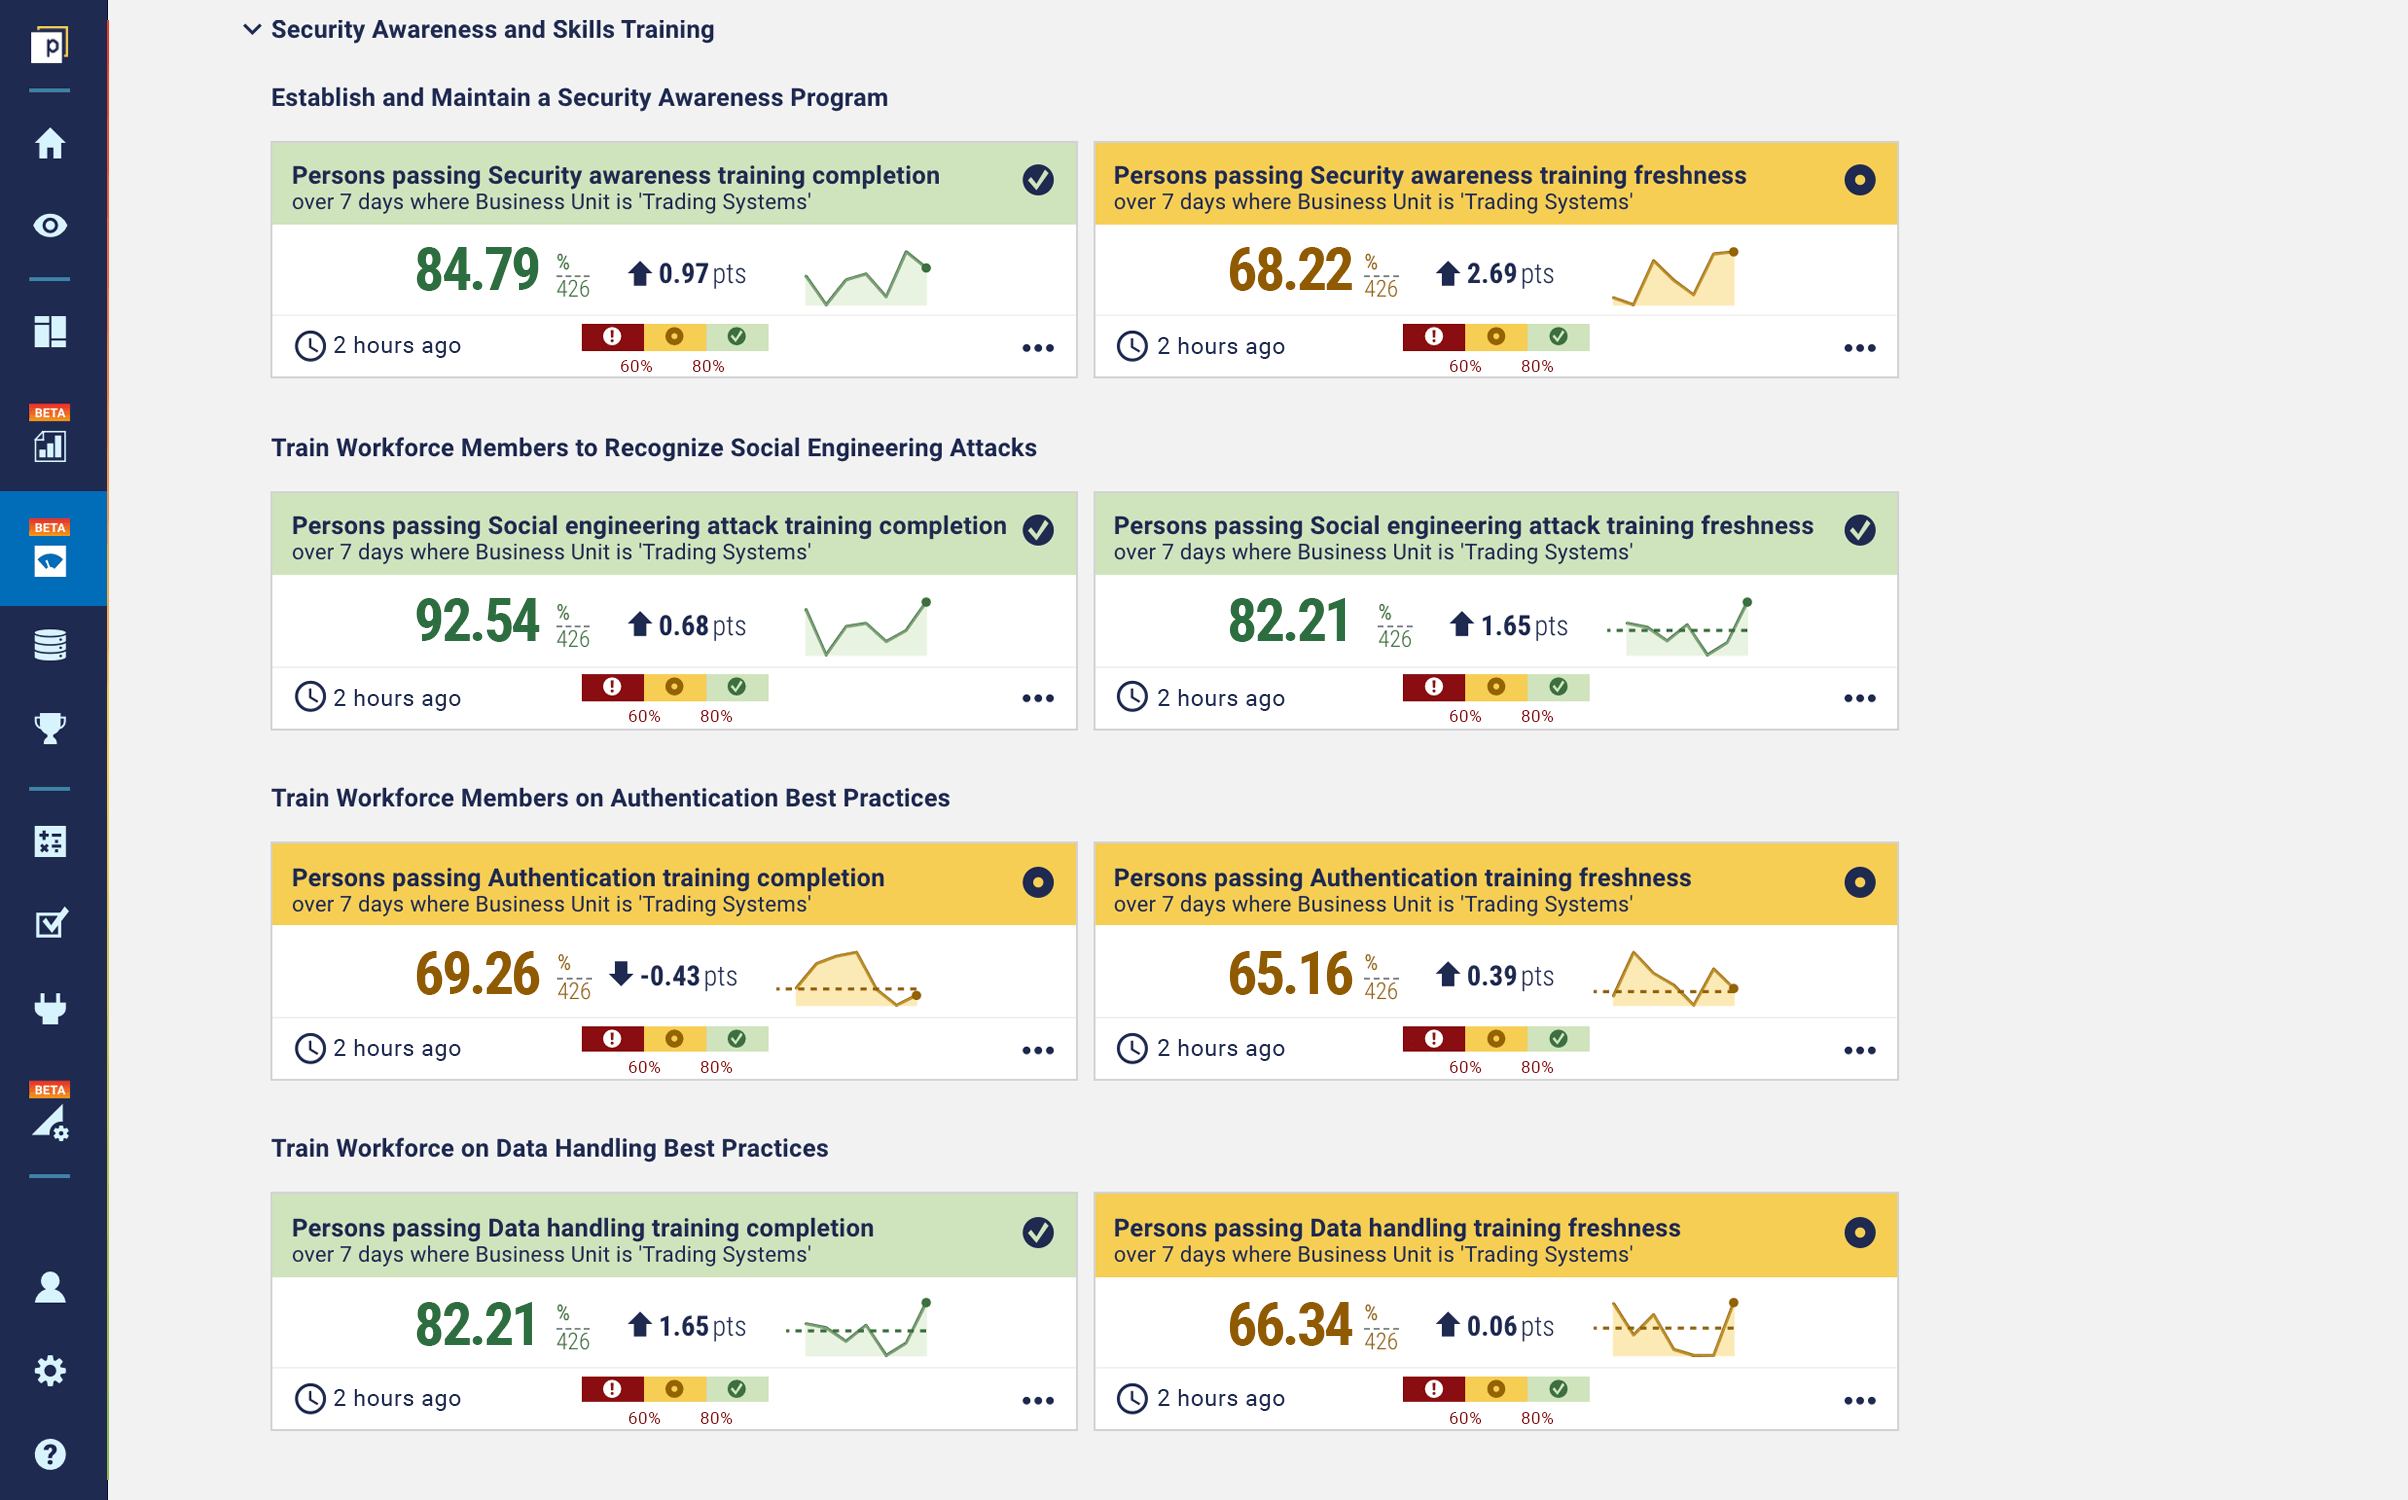 An example dashboard showing the status of Security Awareness controls